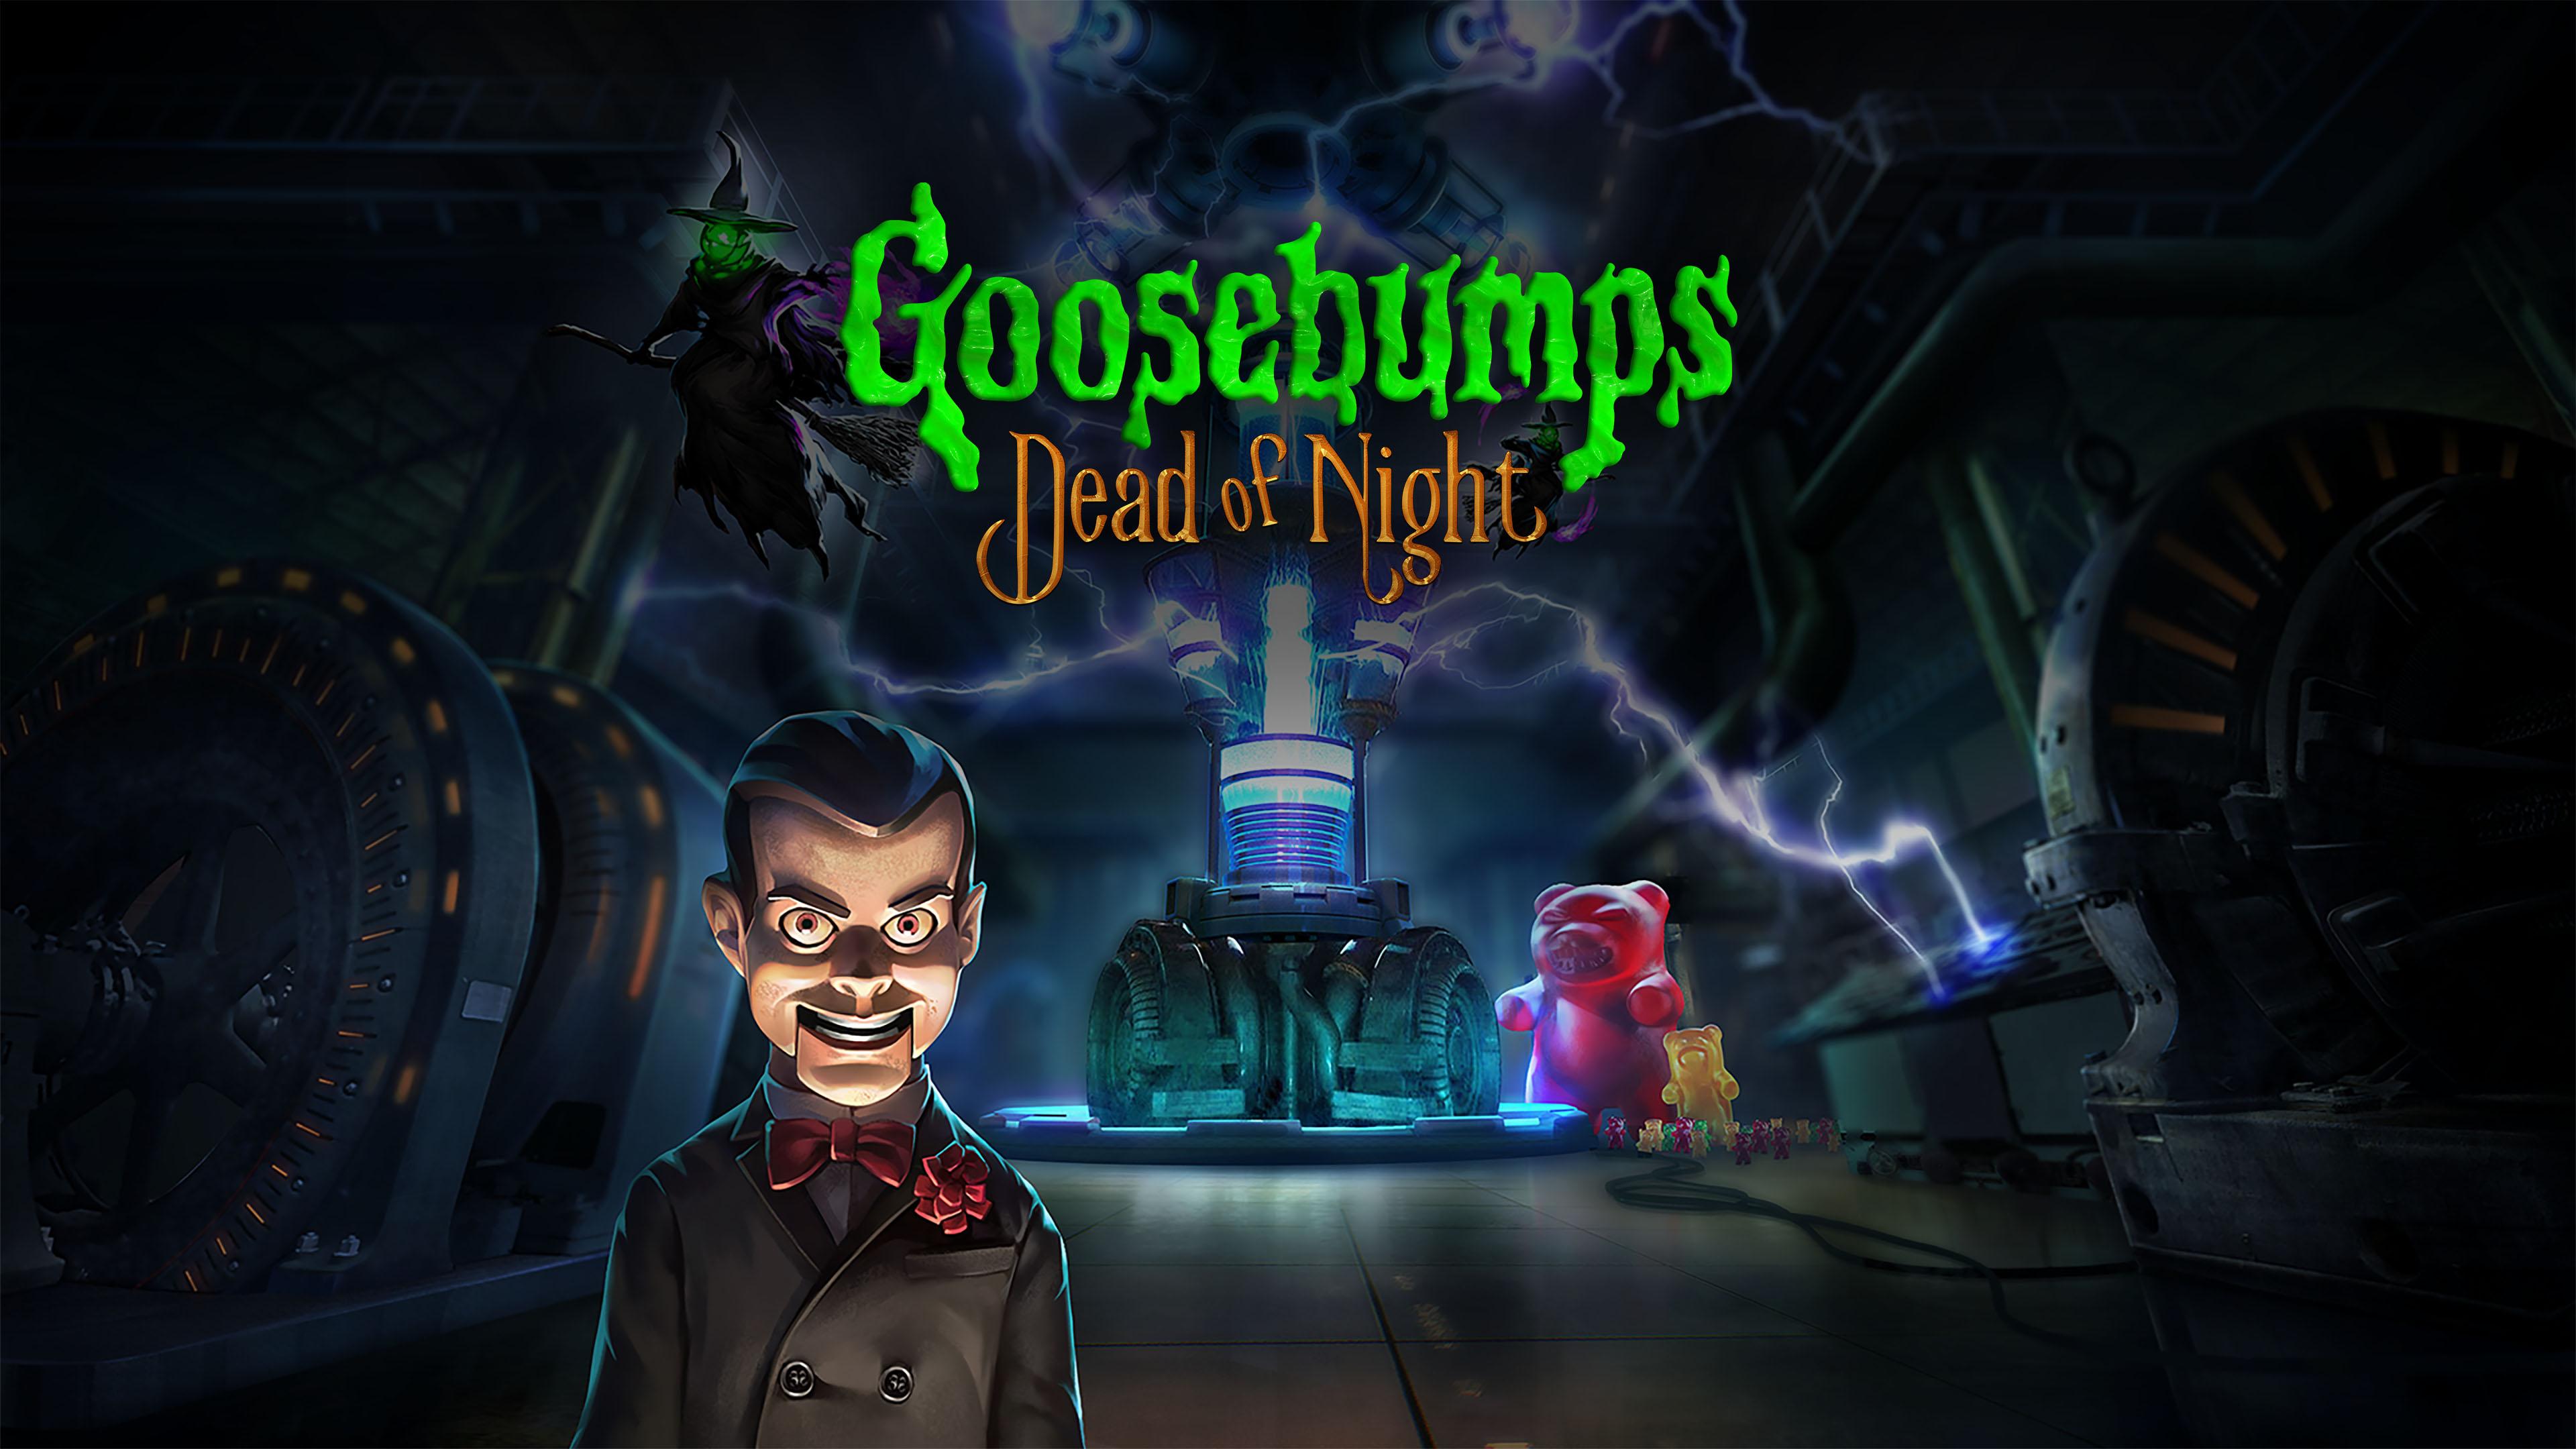 Tons of awesome Goosebumps Dead of Night game wallpapers to download for fr...